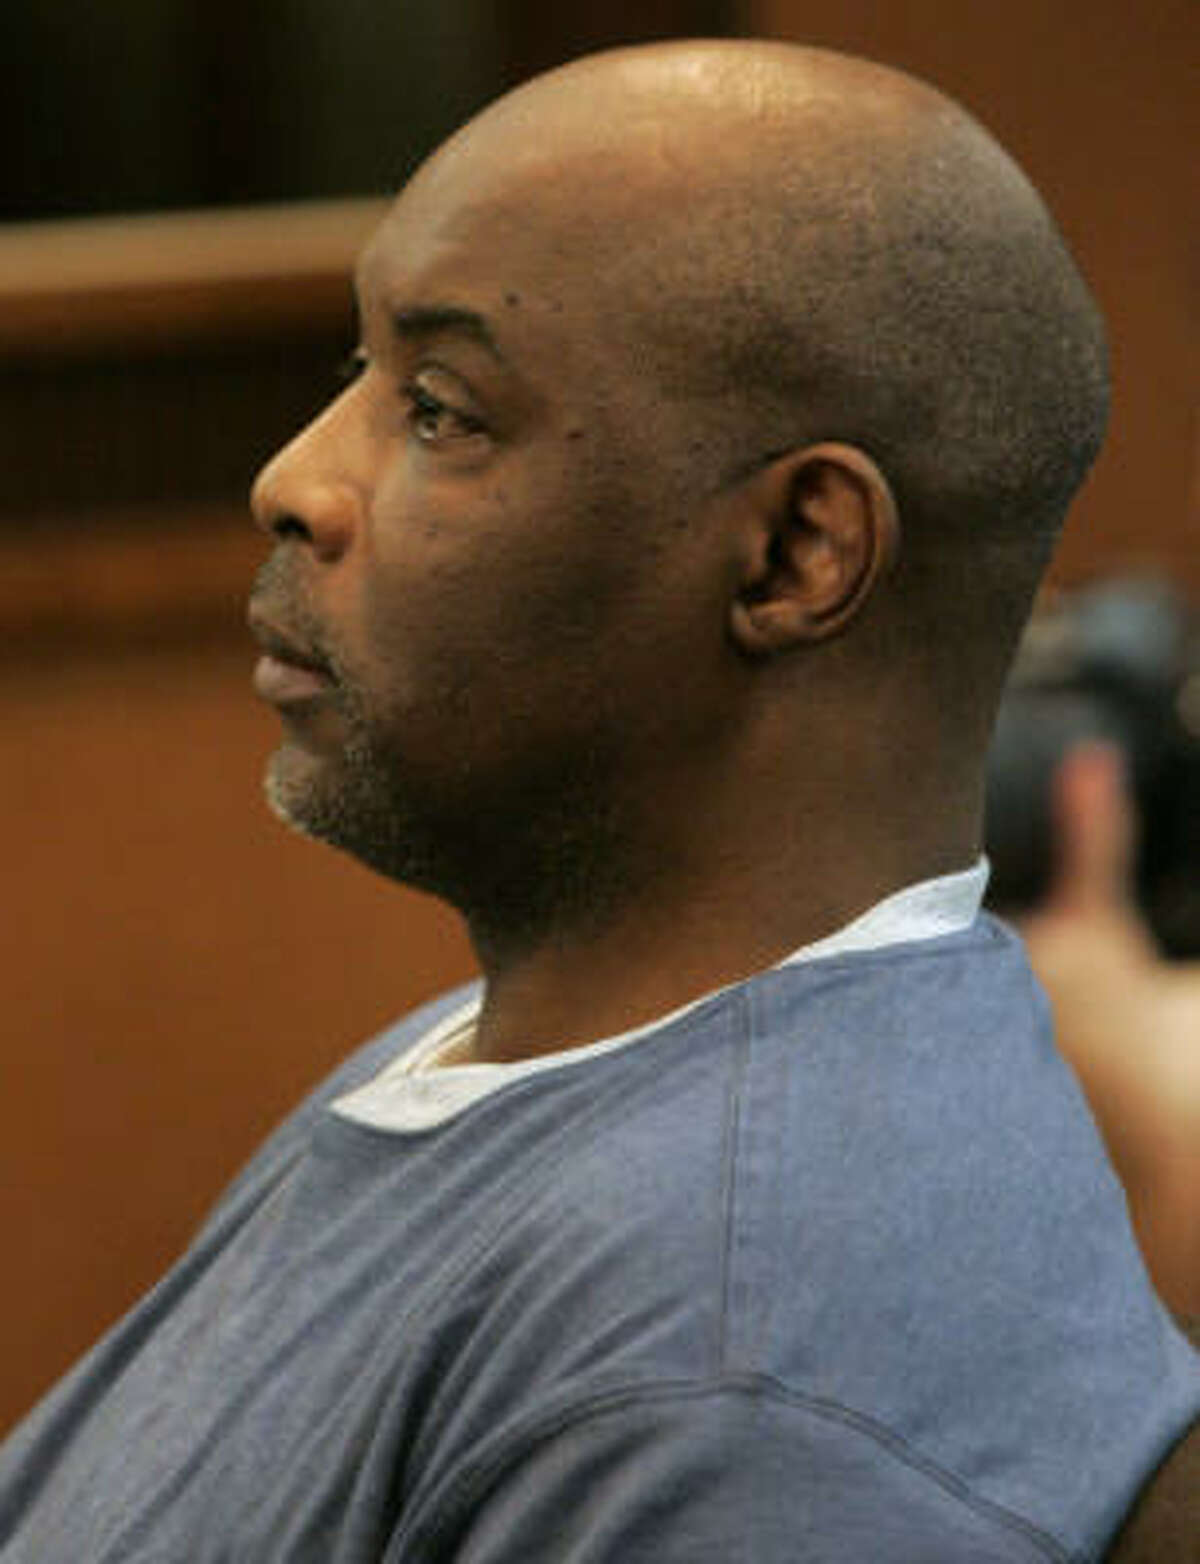 Jury selection will take place this week in Romeo Pinkerton's capital murder trial.